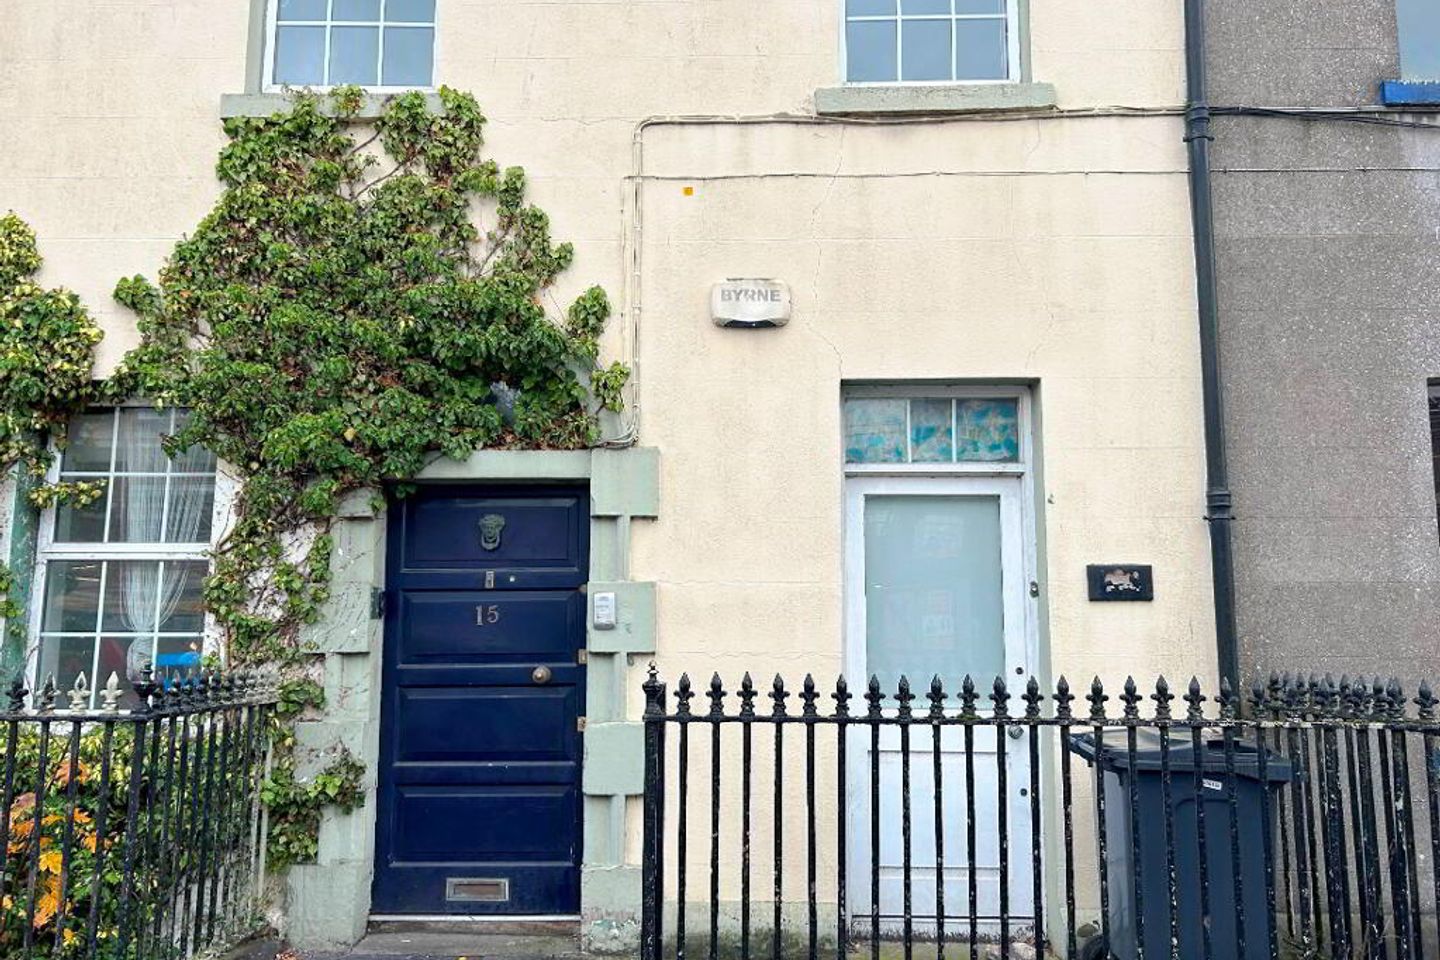 Ground Floor Offices / Surgery,15 Fair Street, Drogheda, Co. Louth